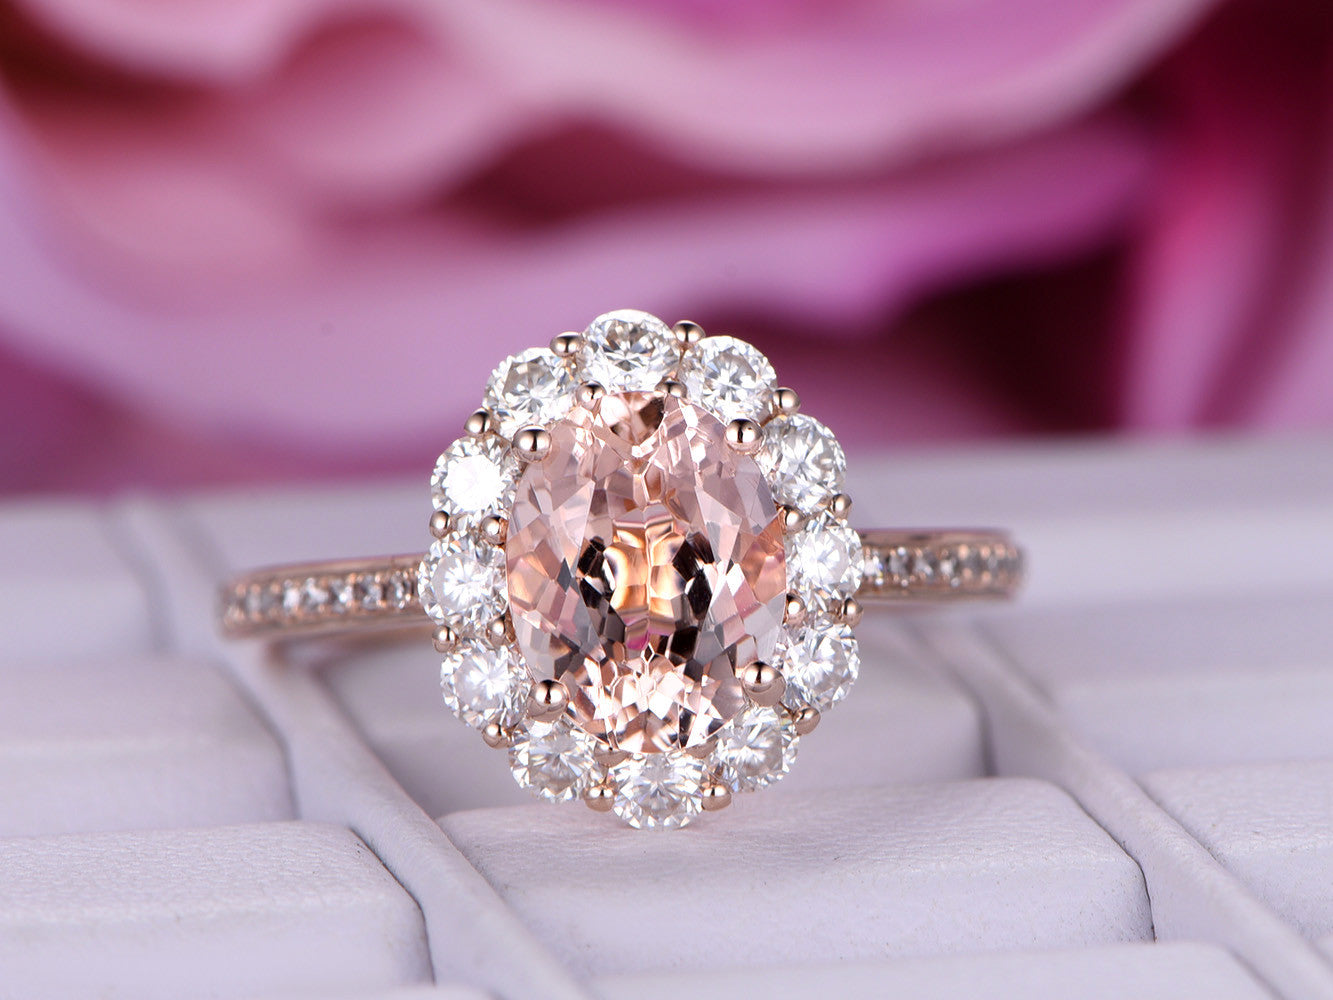 Reserved for AAA Oval Morganite Ring 2mm+ diamond Halo 14K White Gold 6x8mm